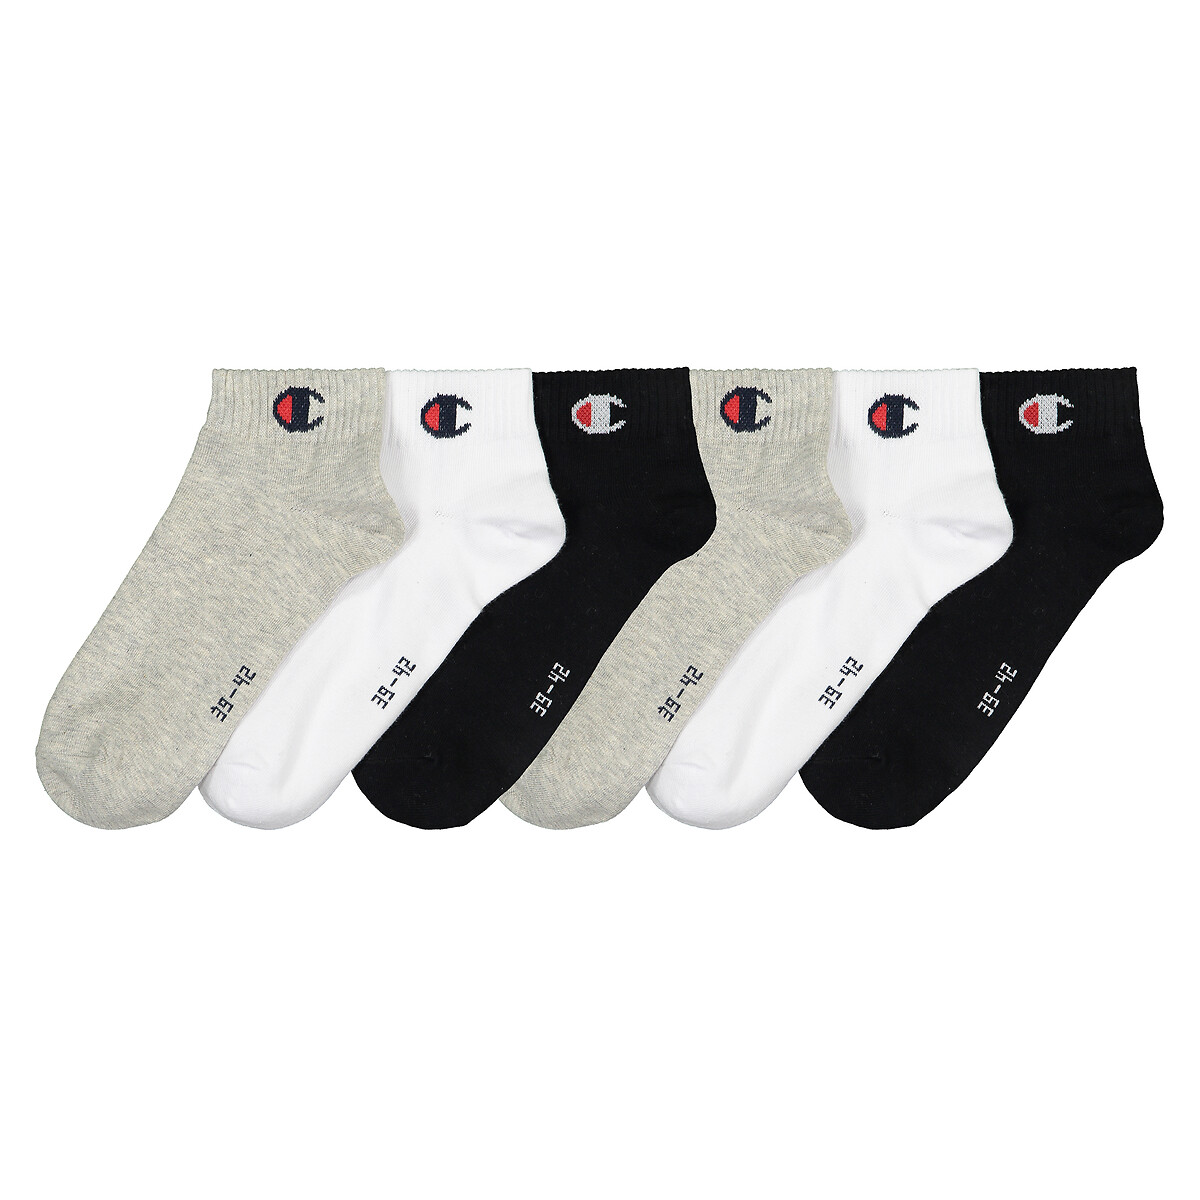 Pack of 6 Pairs of Trainer Socks in Cotton Mix with Logo Print